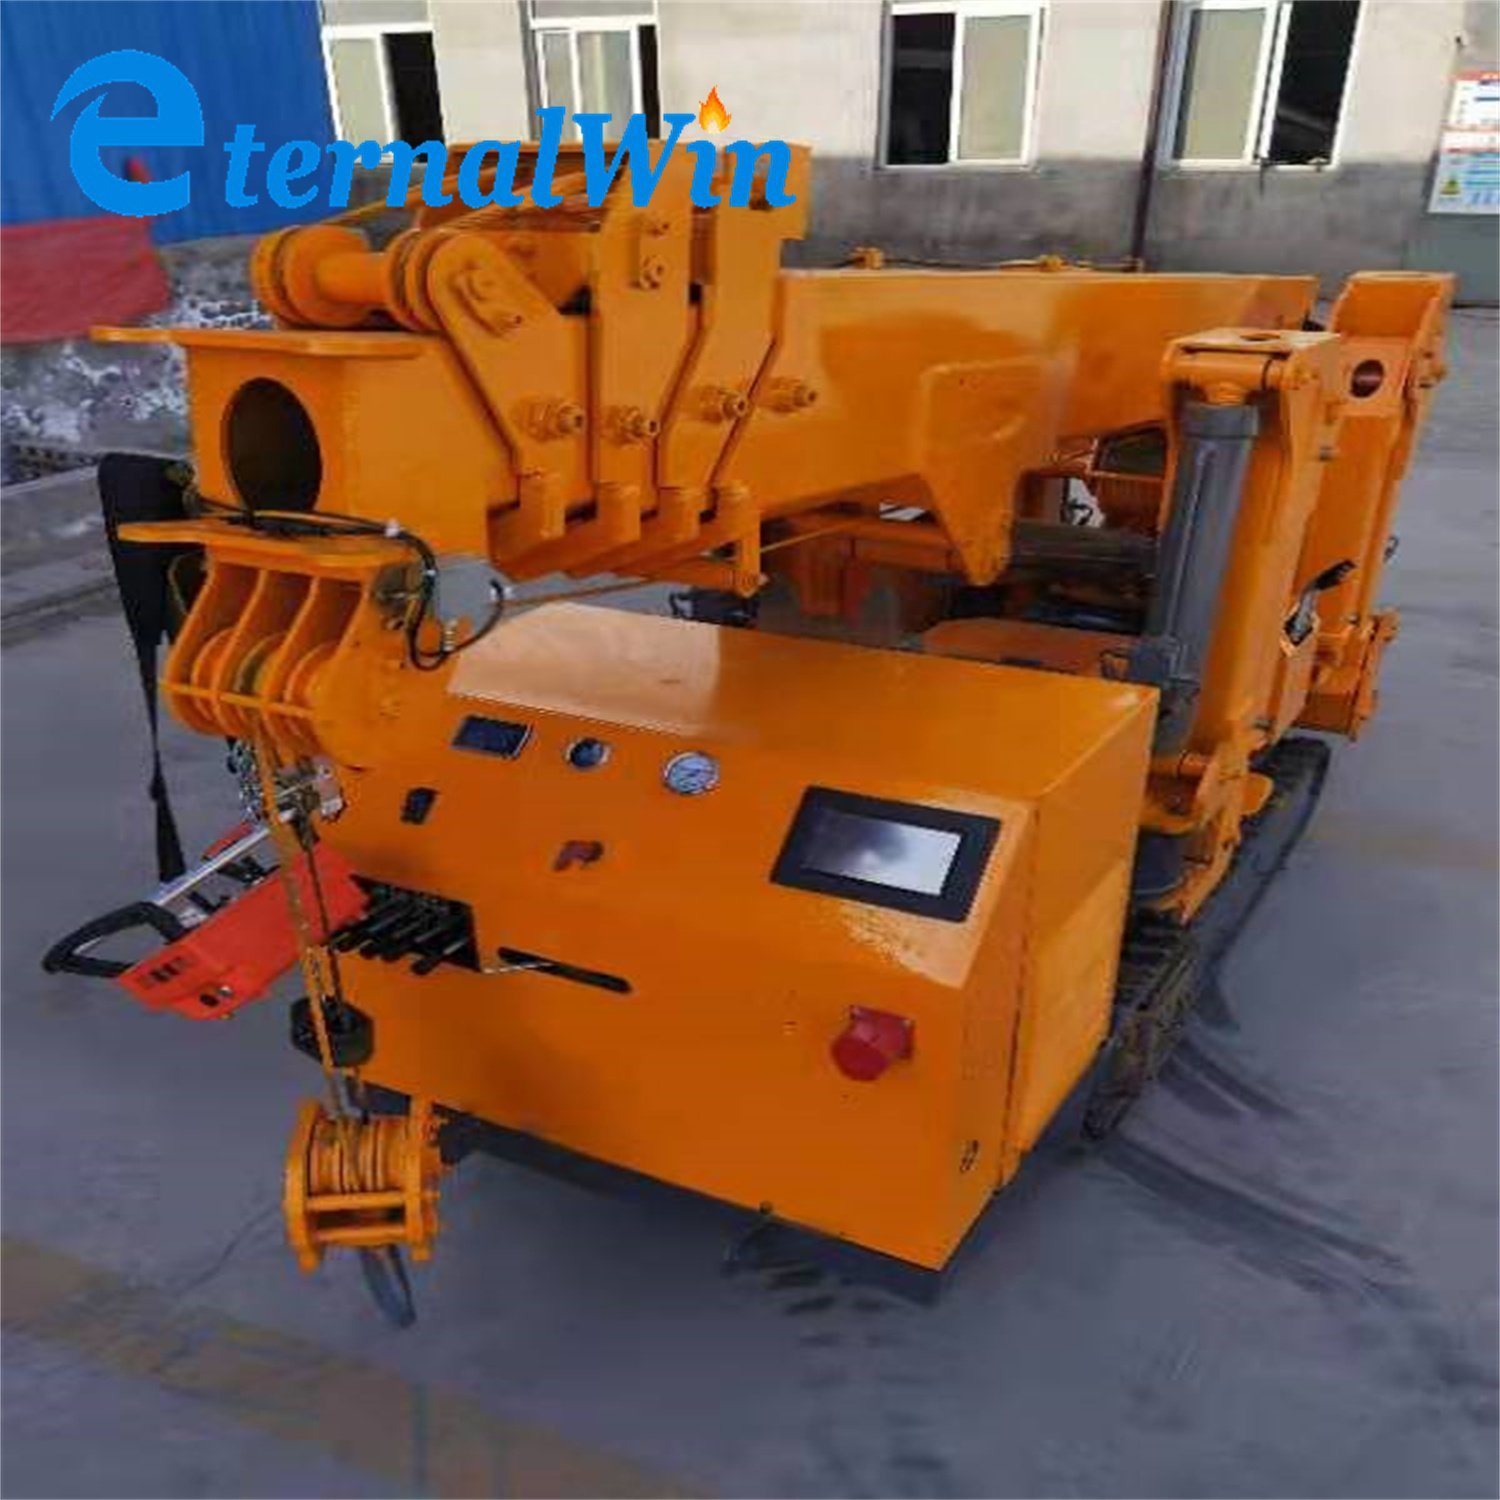 Nigeria Best Sale Eternalwin 5 Tons Construction Machinery Mini Spider Cranes for Narrow Construction Space